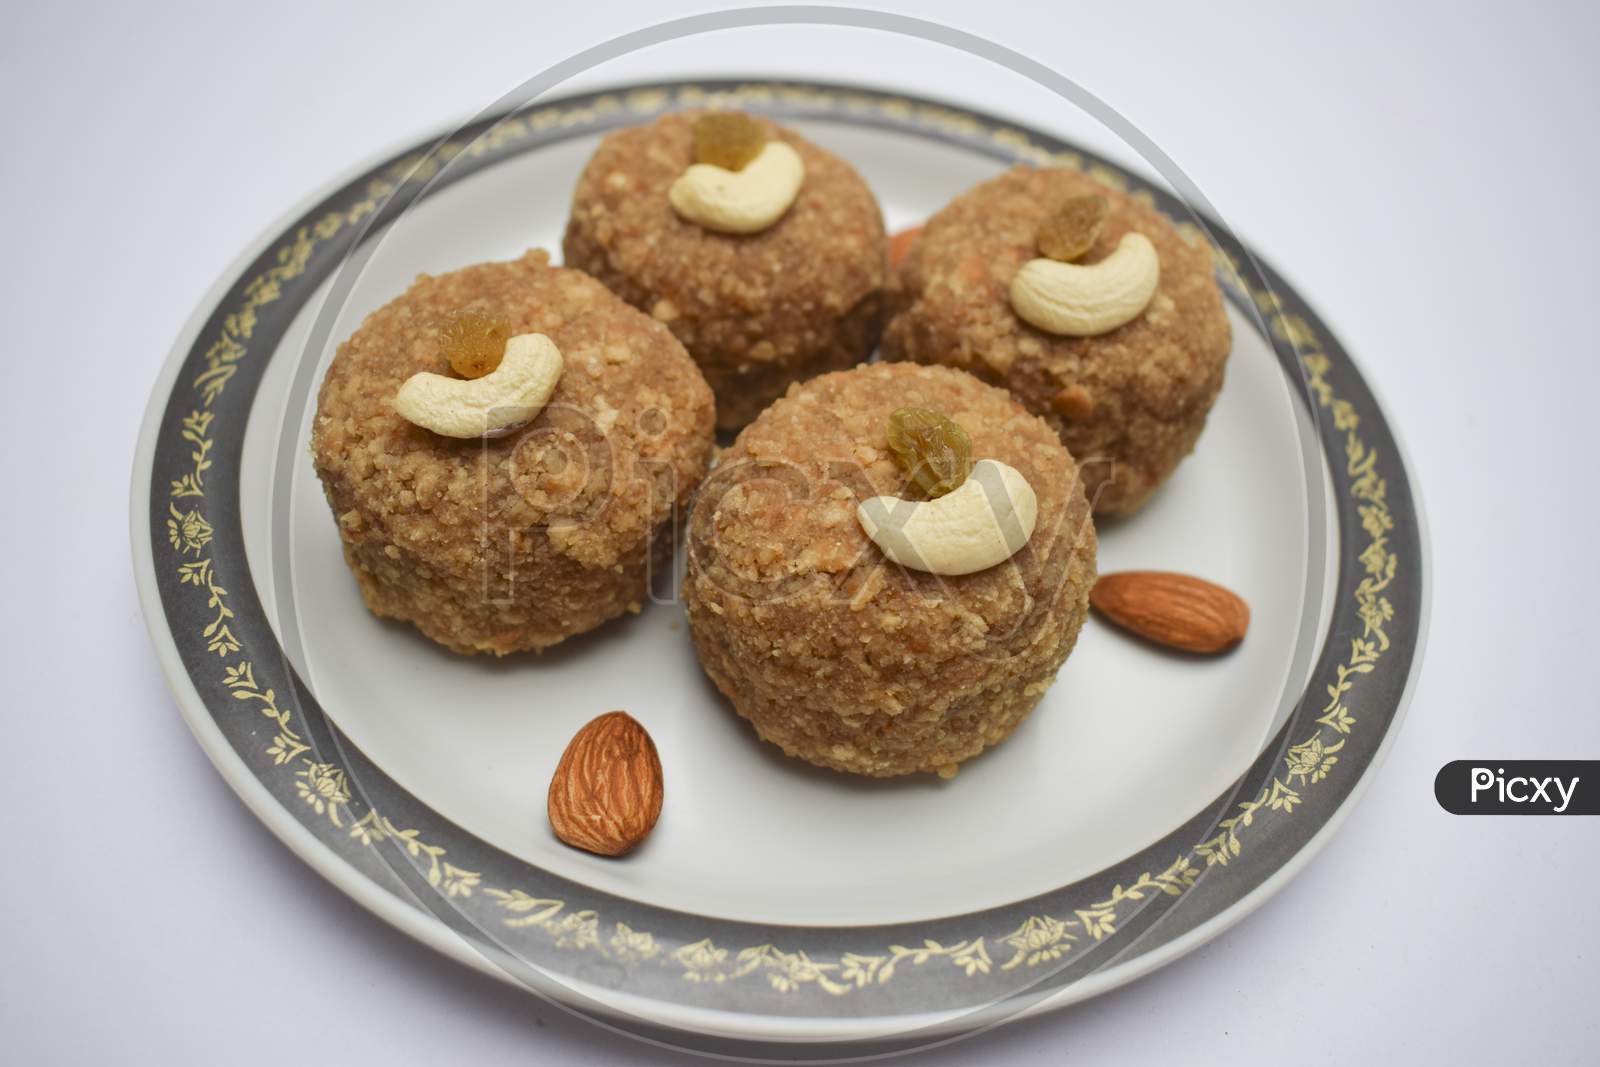 Closeup Of Laddu Or Ladoos Made Of Wheat Flour And Clarified Butter Ghee Served In Plate During Festival Like Ganesh Chaturthi Prasad, Diwali Decorated With Dryfruits Cashewnuts And Almonds On White